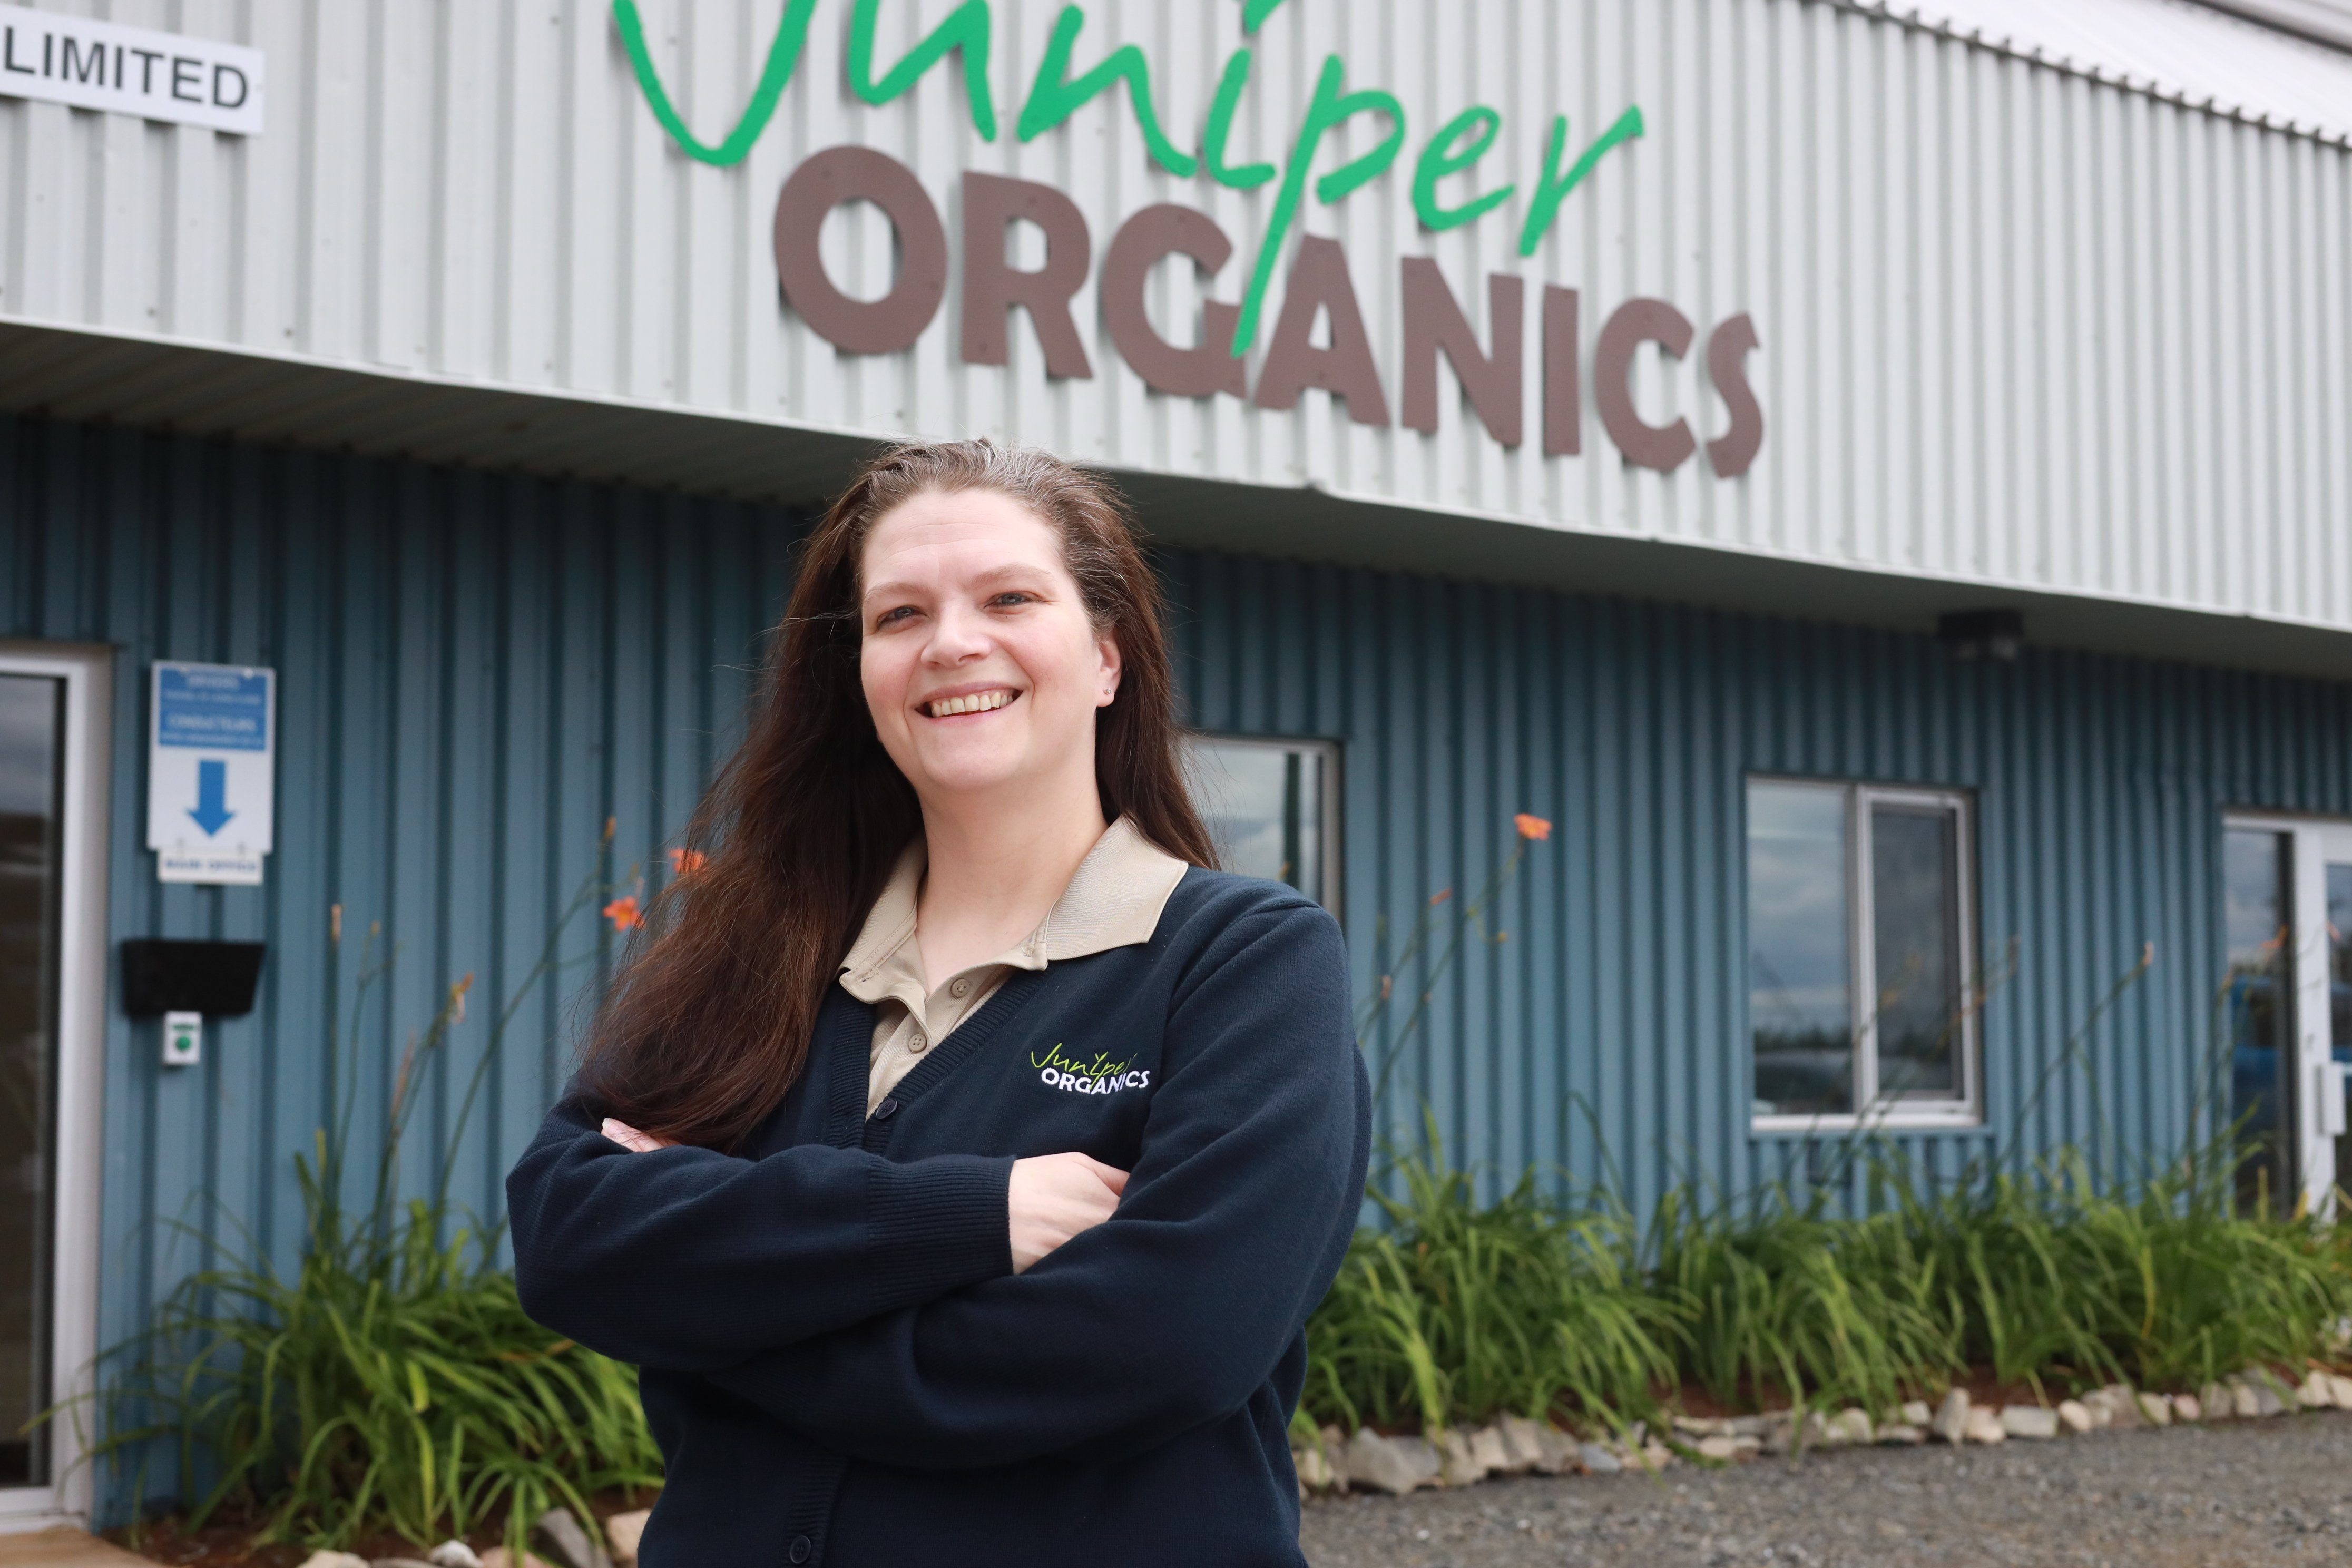 A smiling woman posing in front of a Juniper Organics storefront location